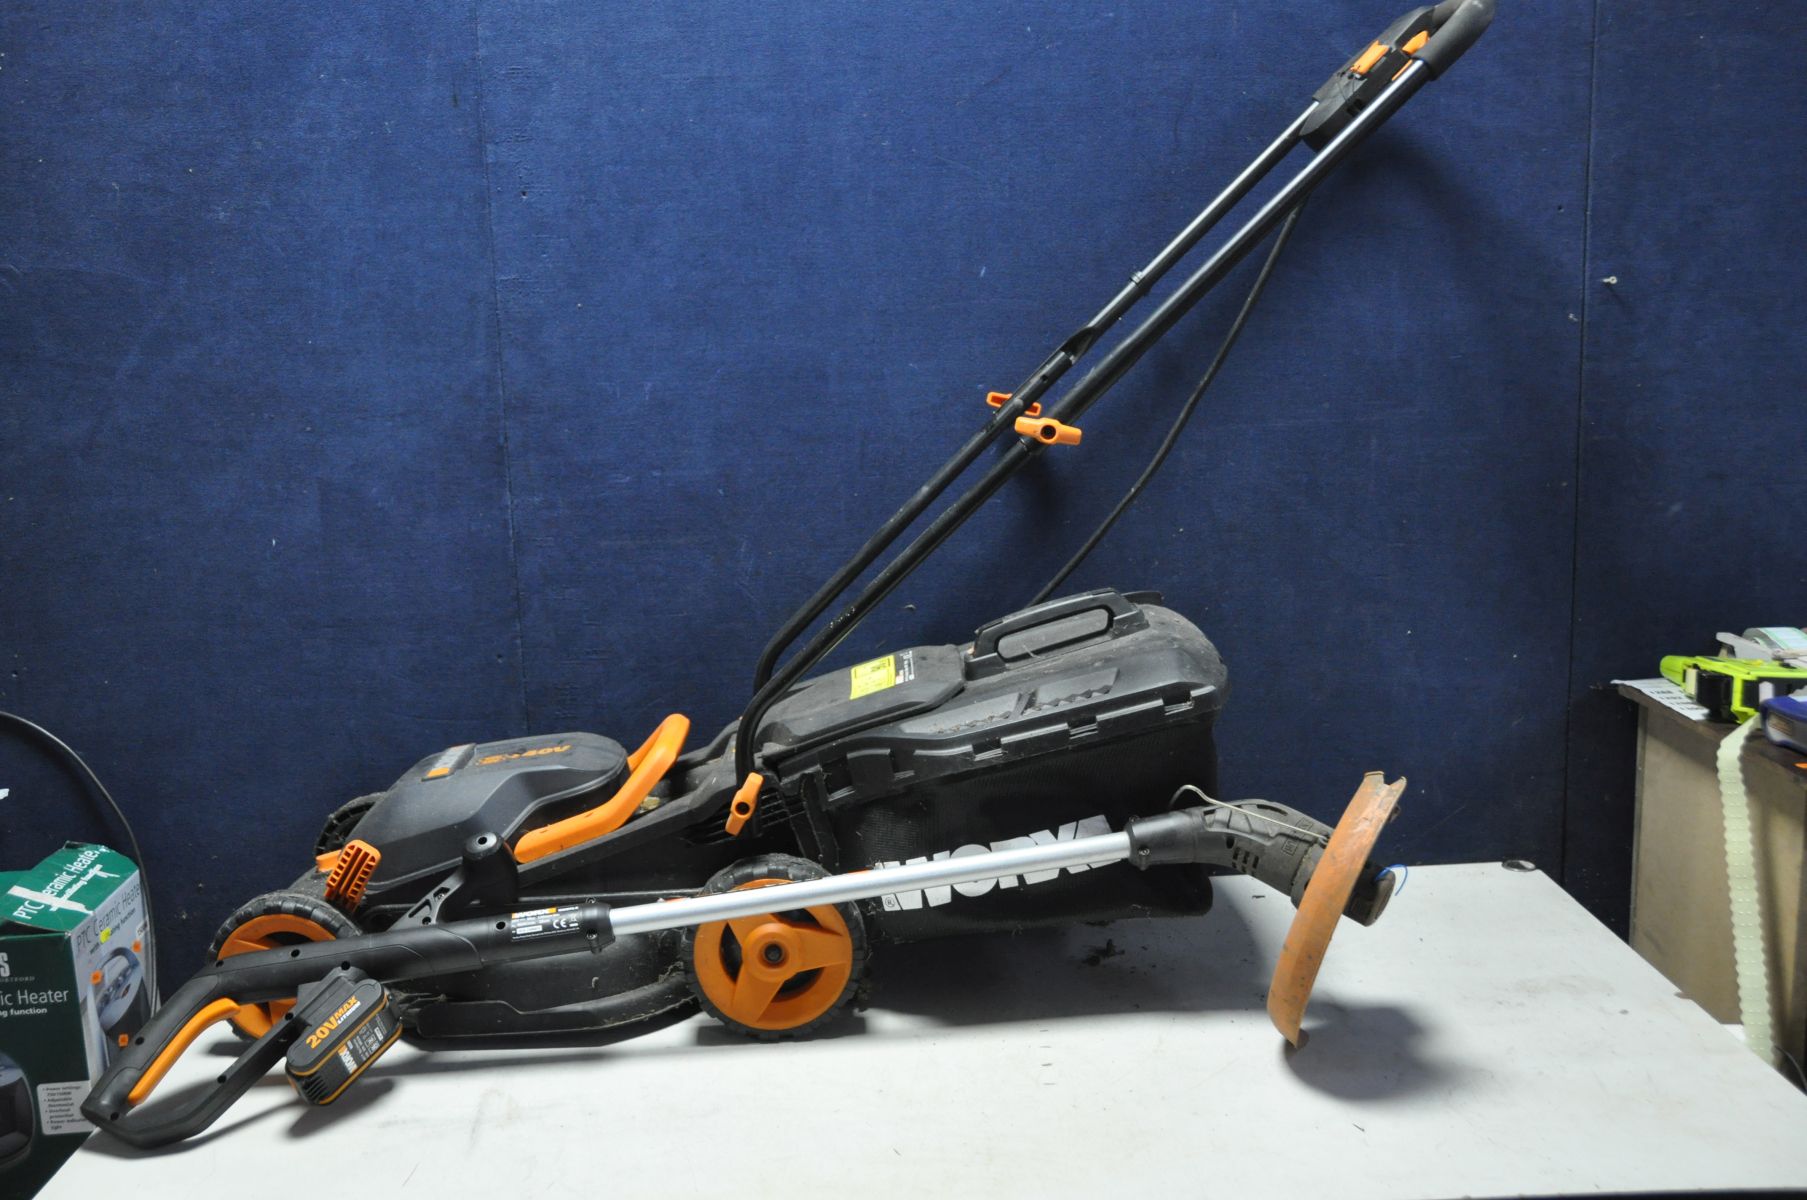 A WORX WG157E 20V STRIMMER and a Worx WG779E.2 40v lawn mower (two batteries and charger PAT pass